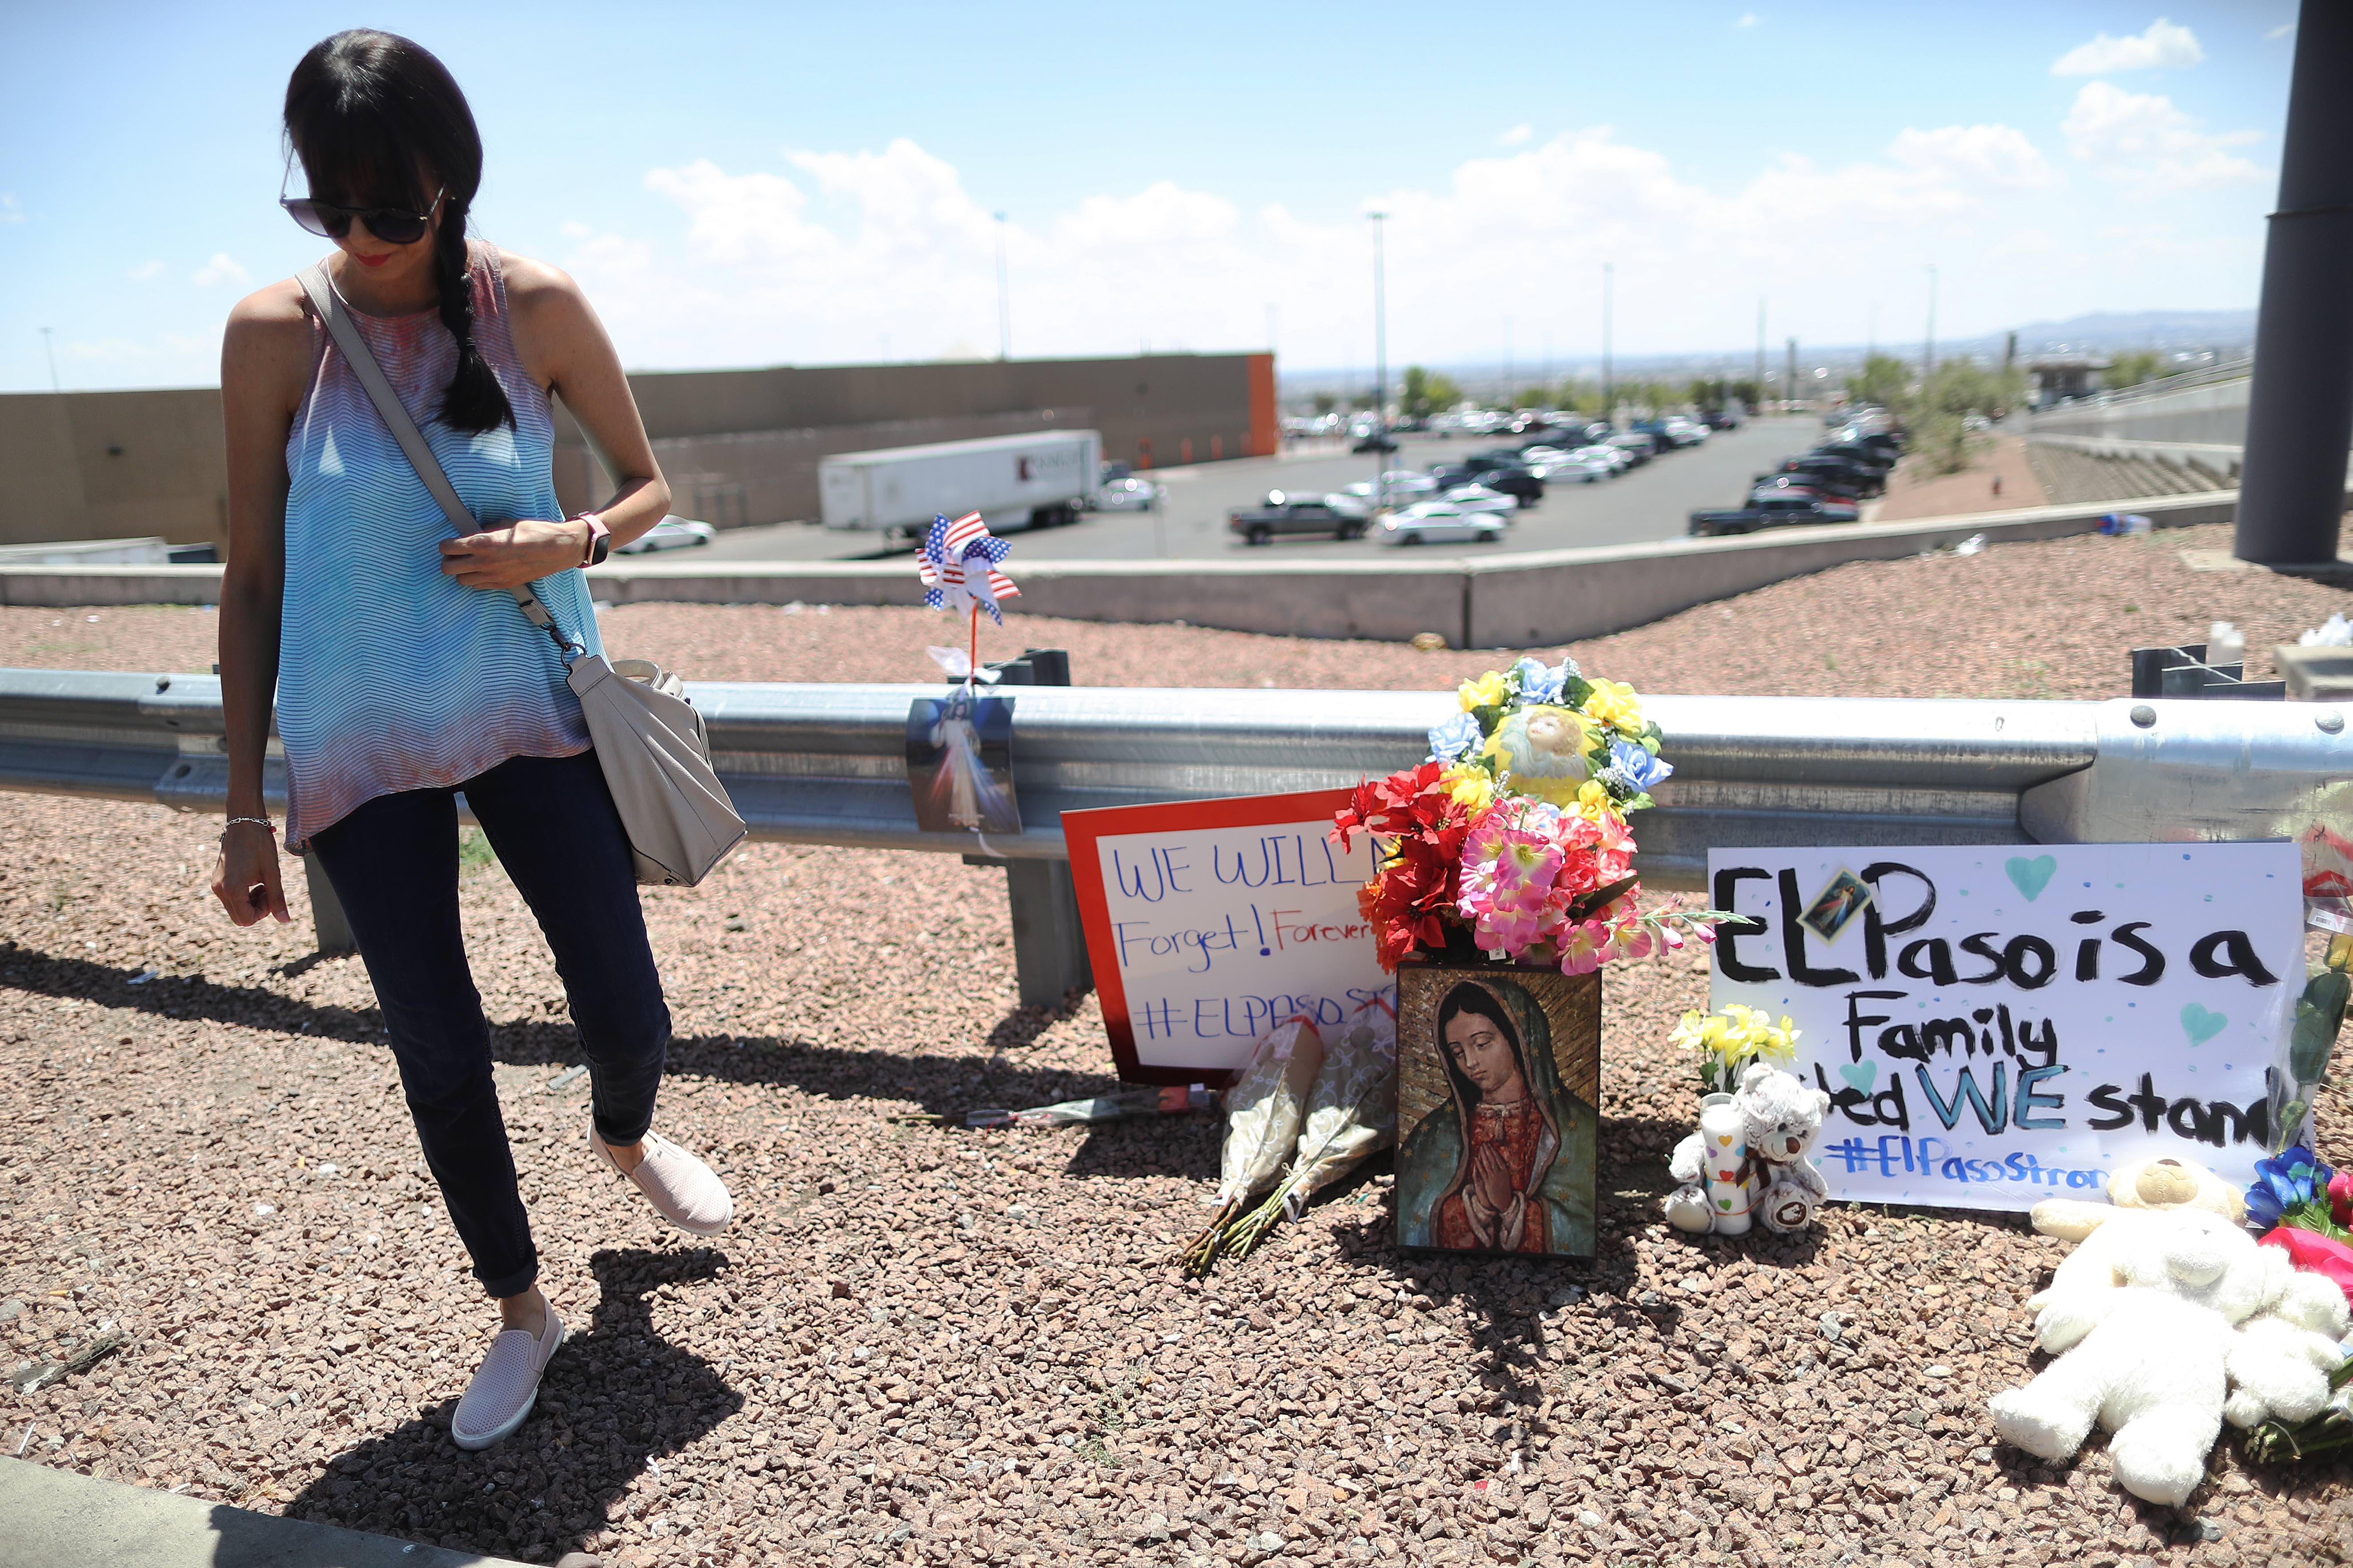 EL PASO, TEXAS - AUGUST 04: A woman walks away from a makeshift memorial outside Walmart, near the scene of a mass shooting which left at least 20 people dead, on August 4, 2019 in El Paso, Texas. Photo: Mario Tama/Getty Images